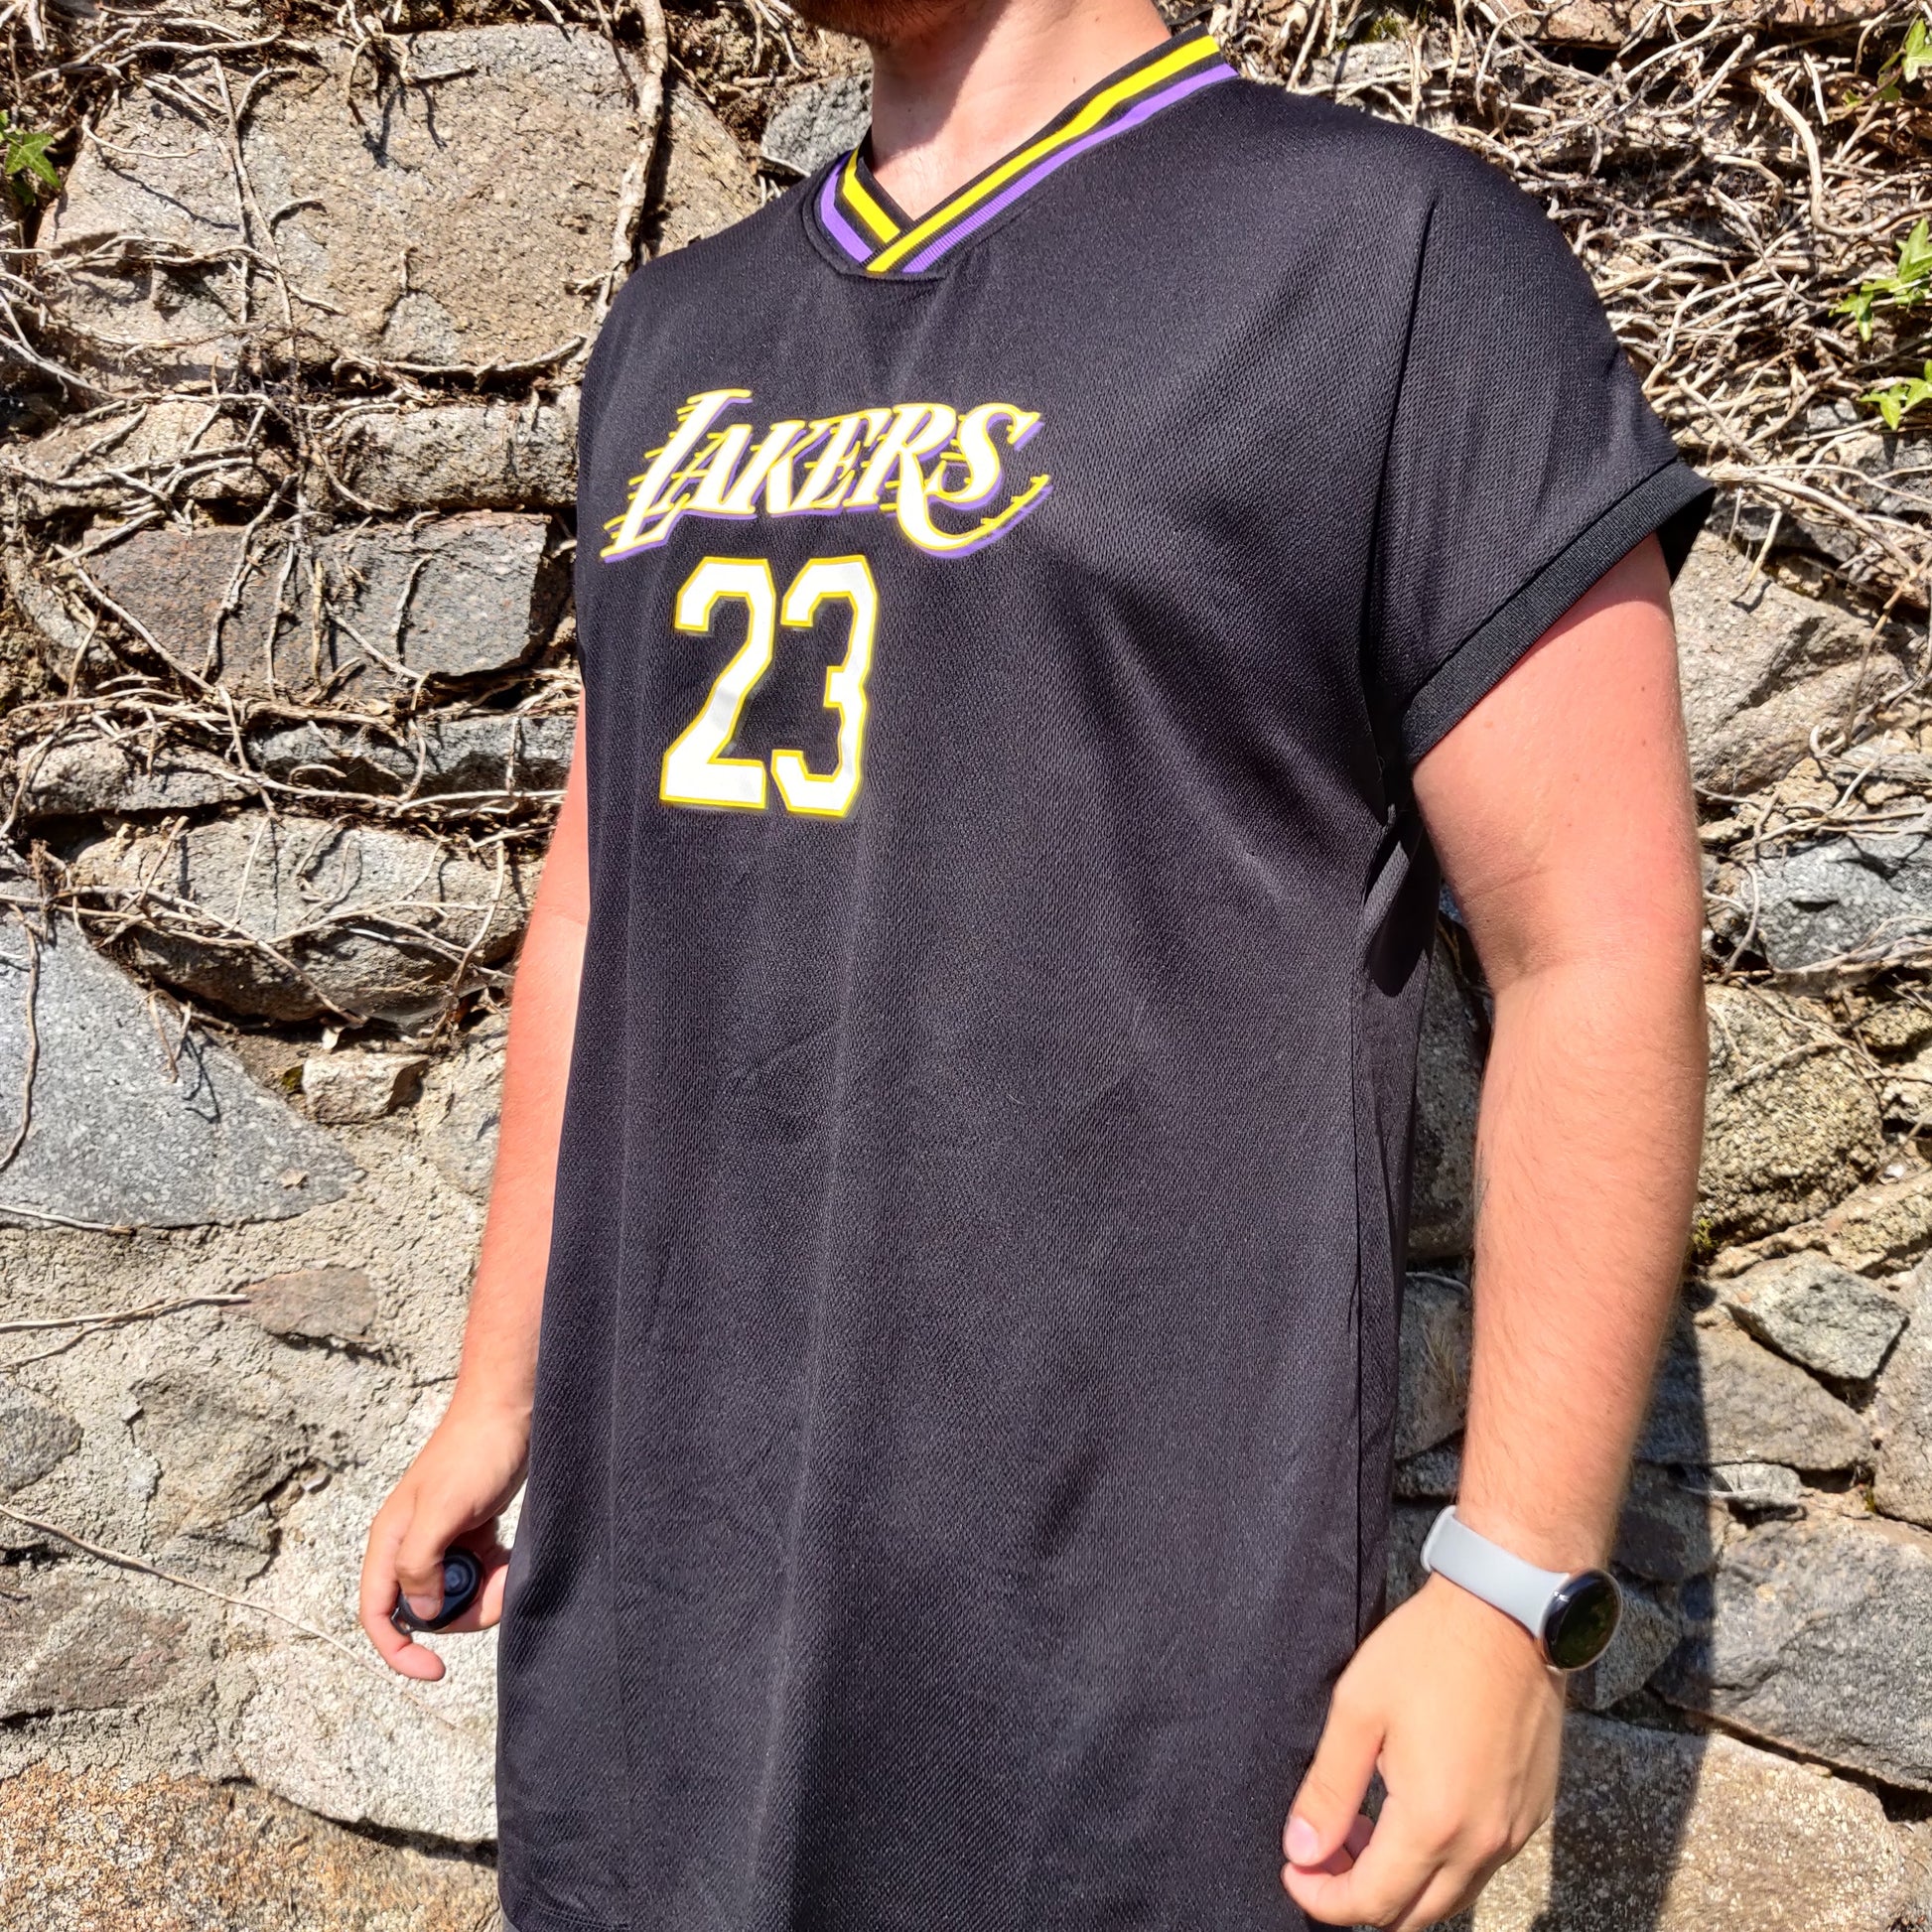 black lakers jersey outfit